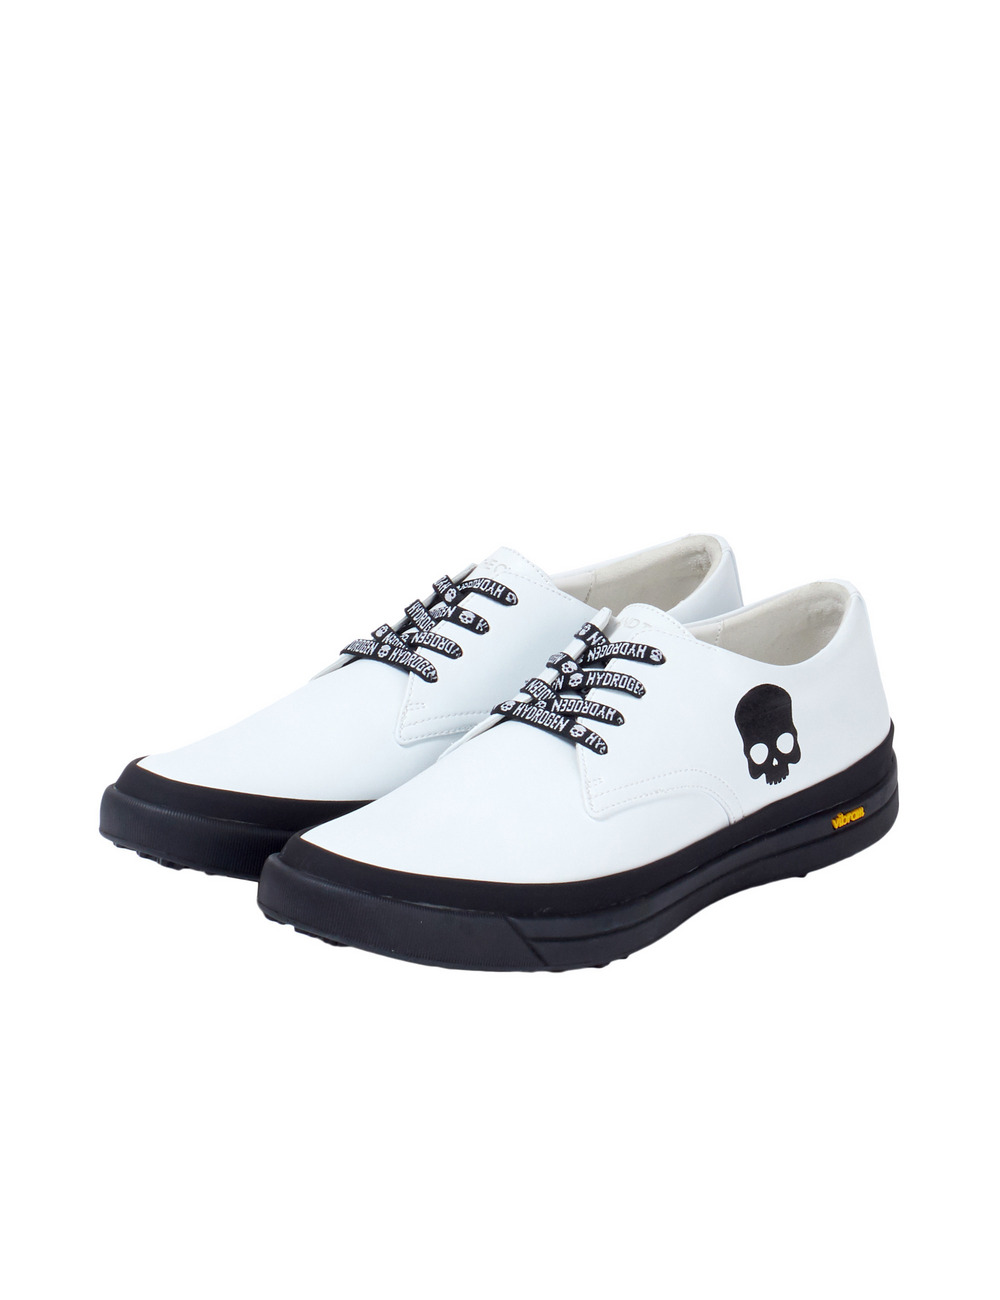 【AND THE CUP by HYDROGEN】ゴルフシューズ(プレーントゥ)/【AND THE CUP by HYDROGEN】GOLF SHOES(PLAIN TOE) 詳細画像 ブラック 1